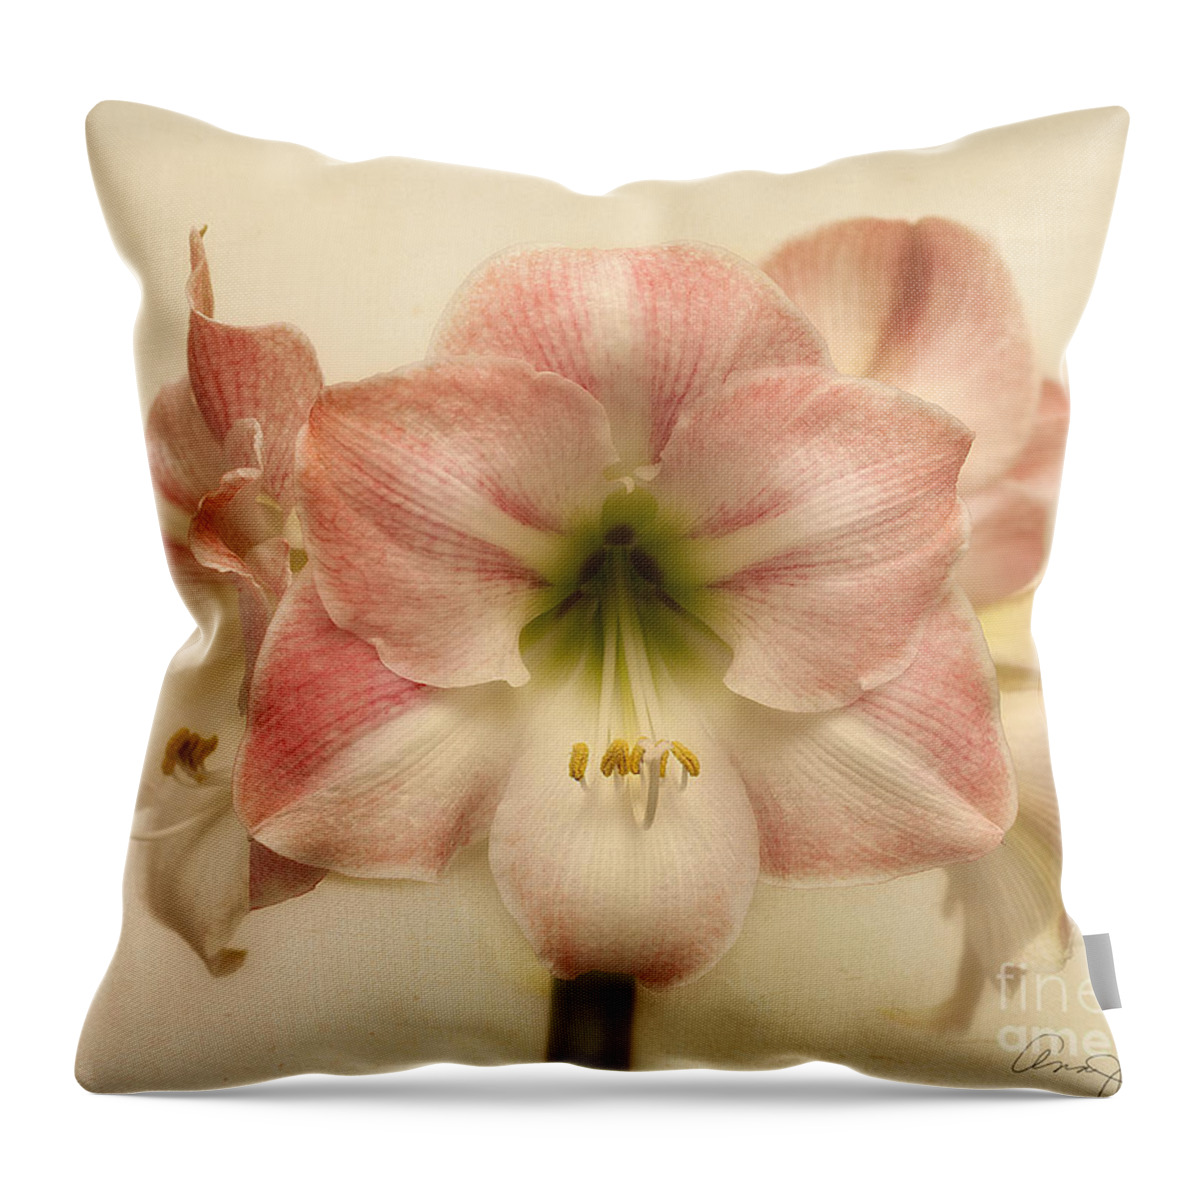 #flower #floral #floralphotography #macro #amaryllis #pinkandwhite #4flowers Throw Pillow featuring the photograph Amaryllis Apple Blossom by Ann Jacobson